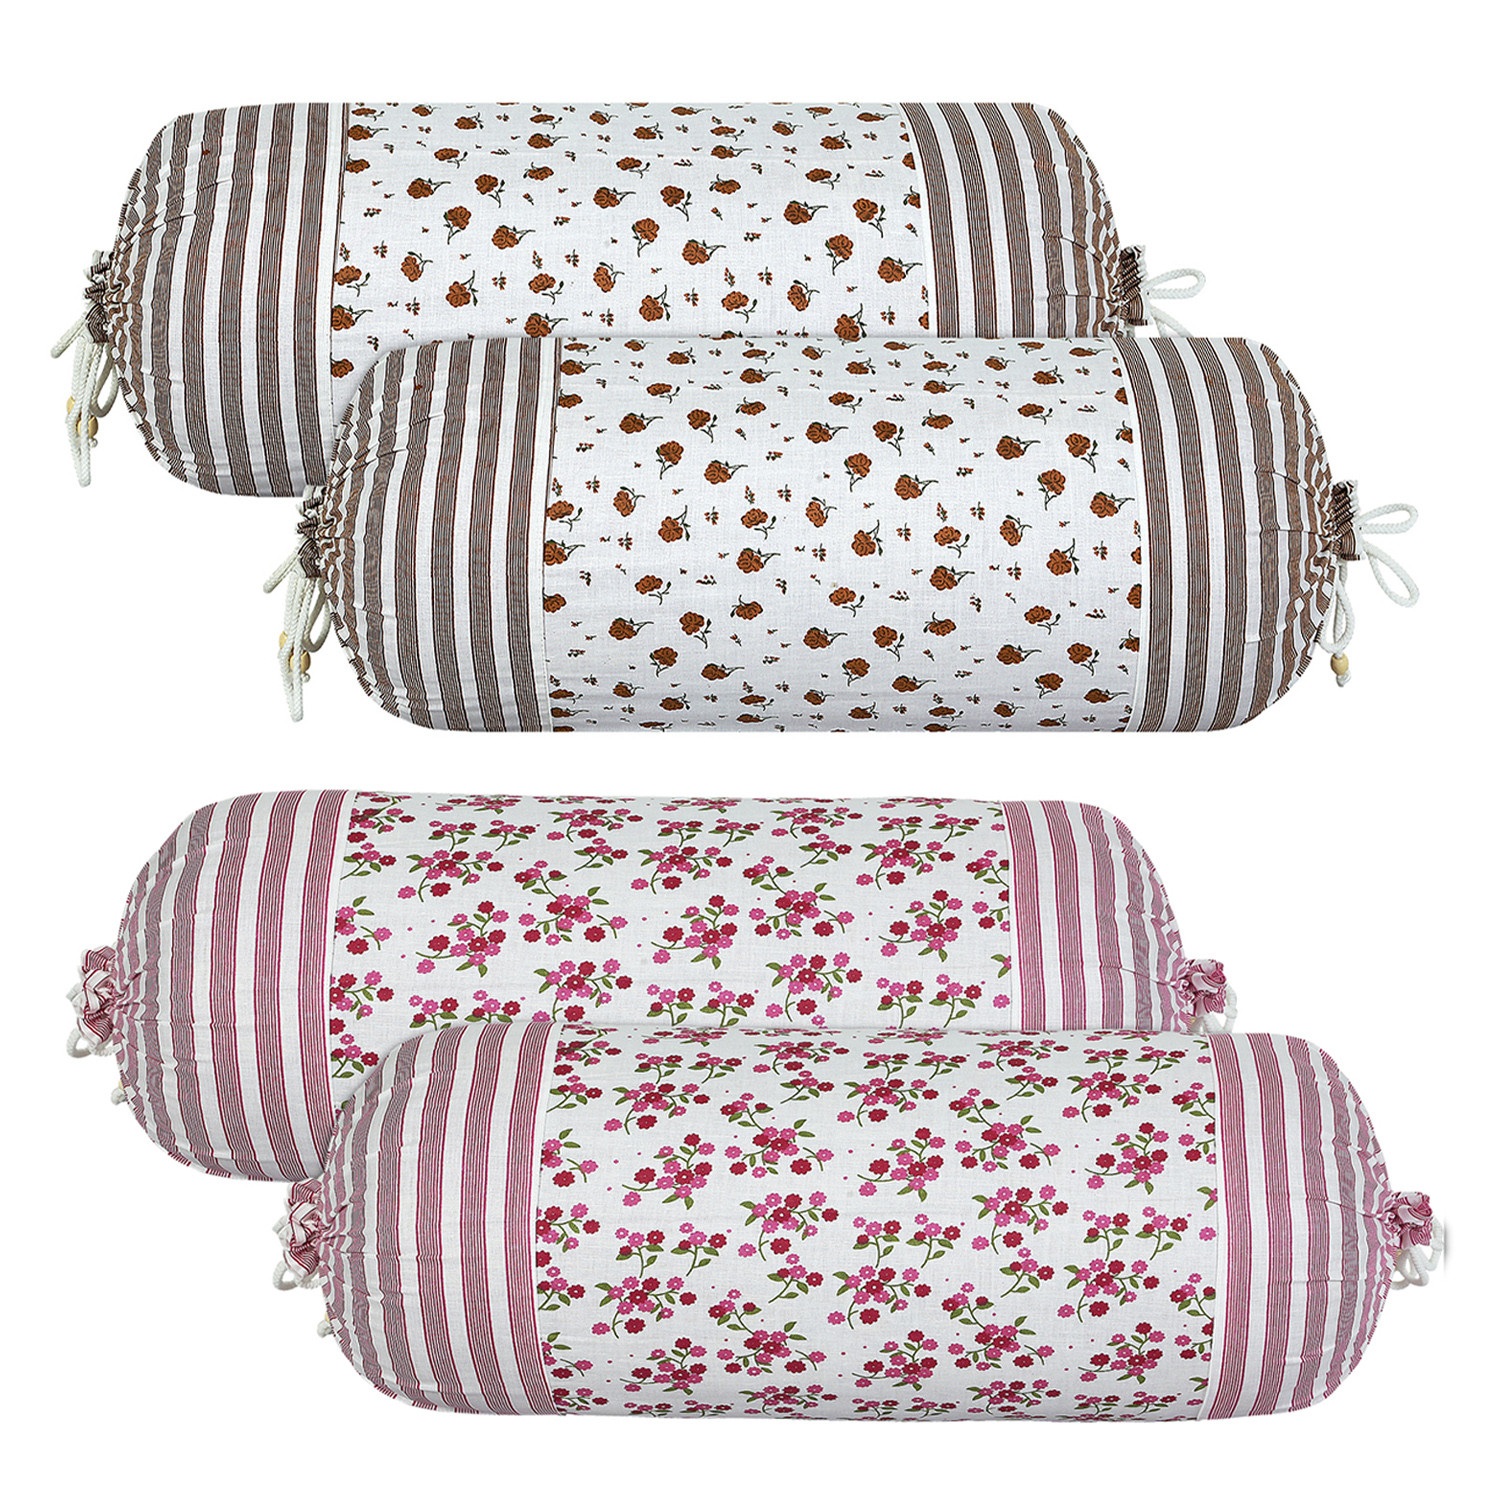 Kuber Industries Bolster Covers | Cotton Bolster Cover Set | Diwan Bolster Cover Set | Bolster Pillow Cover | Flower Masand Cover | 16x32 Inch | Pack of 4 | Multi